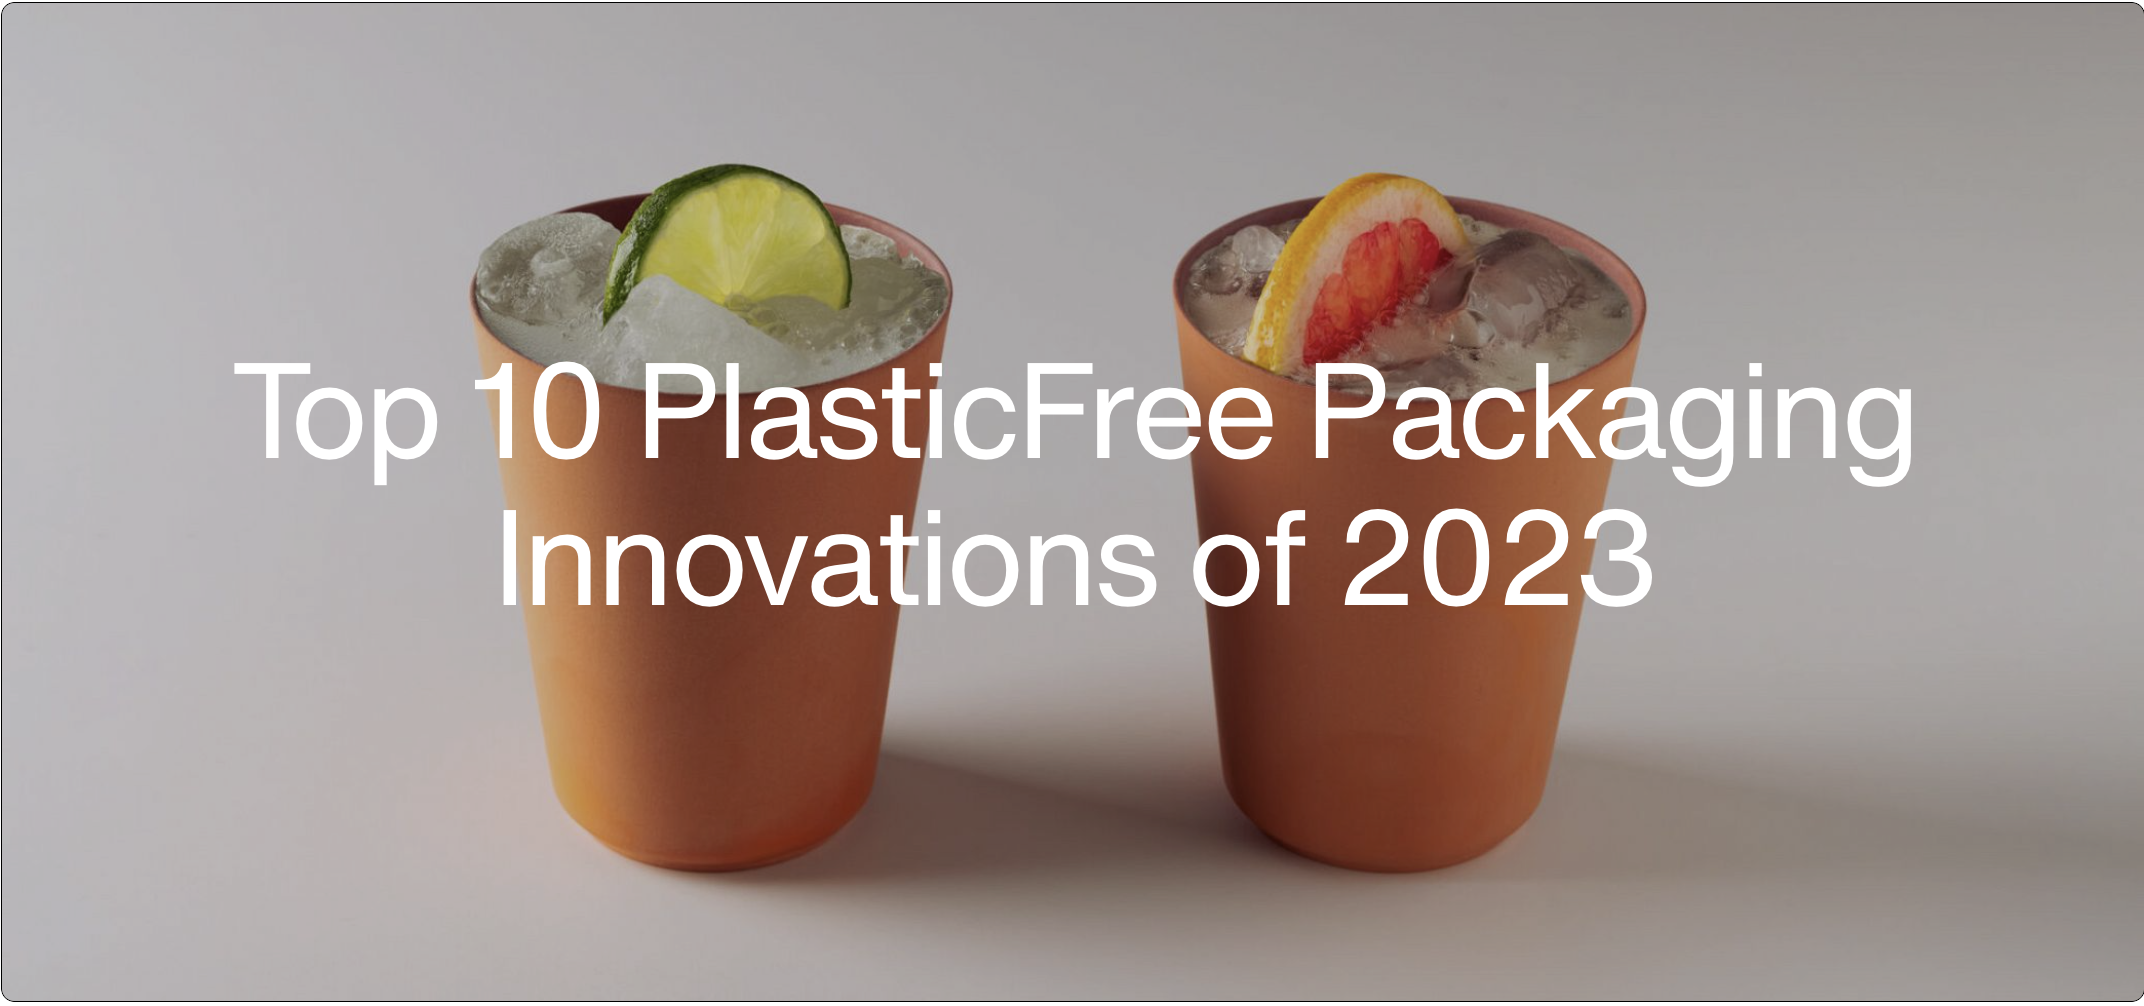 Top 10 PlasticFree Packaging Innovations of 2023